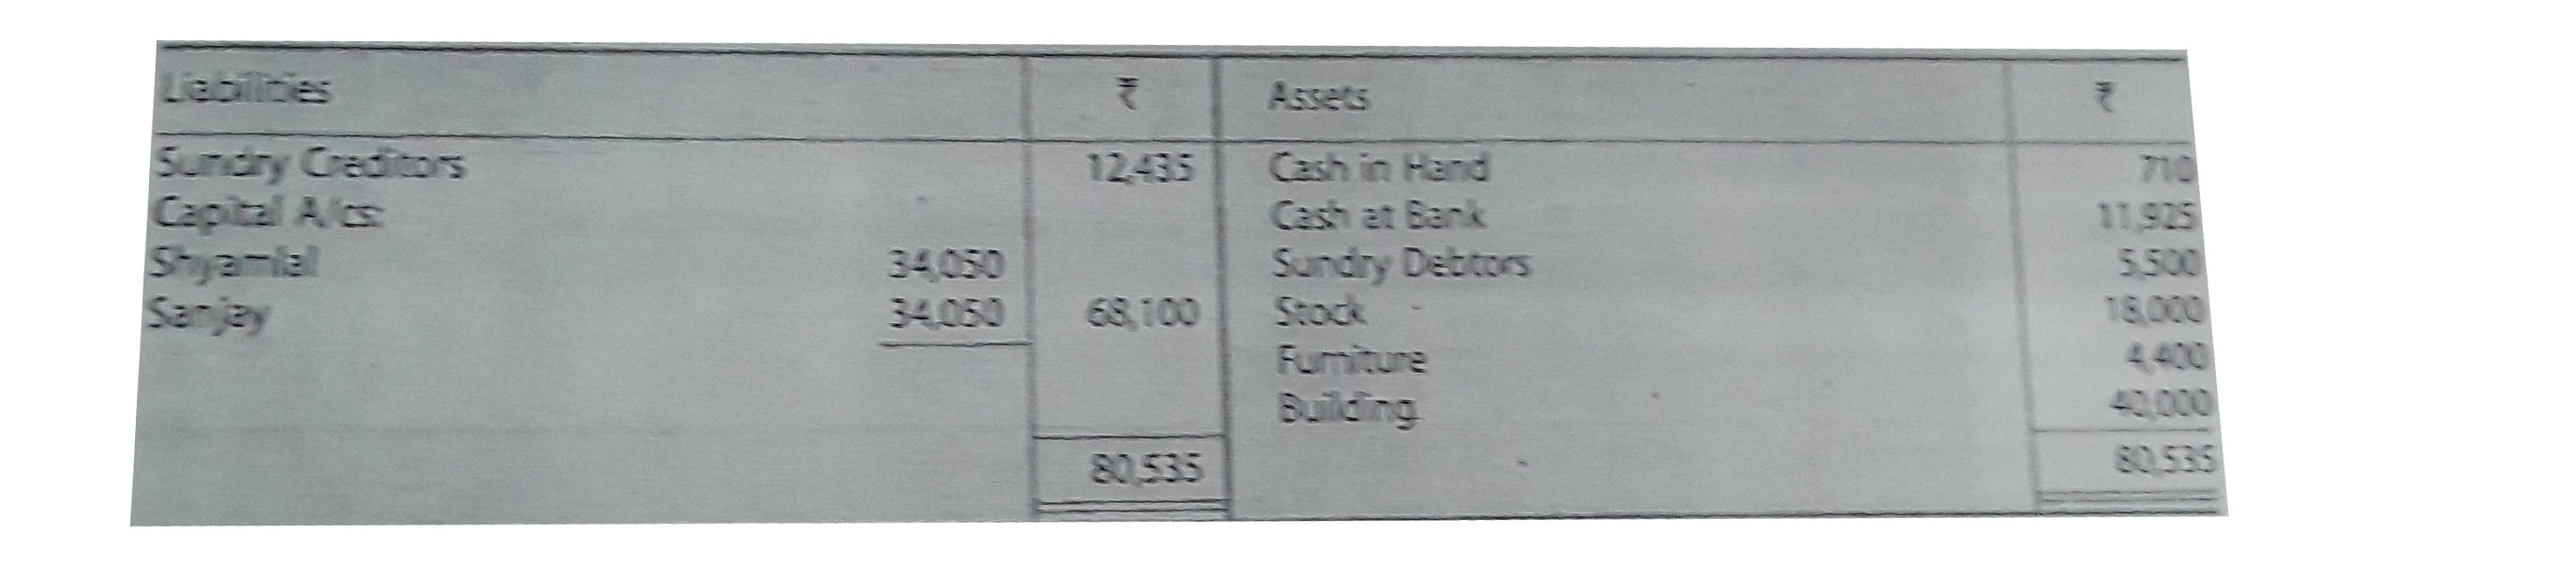 Shyamlal and Sanjay were in partnership business sharing profits and losses in the ratio of 2 : 3 respectively. Their Balance Sheet as at 31st March, 2019 was:      On 1st April, 2019, they admitted Shanker into partnership for 1/3rd share in future profits on the following terms:   (a) Shanker is to bring in RS.30,000 as his capital and RS.20,000 as goodwill  which is to remain in the business.   (b) Stock and Furntiure are to be reduced in value by 10%.   (c) Building is to be apperciated by RS.15,000.   (d) Provision of 5% is to be made on Sundry Debtors for Doubtful Debt.   (e) Unaccounted Accrued Income of RS.2,400 to be provided for. A debtor whose dues of RS.4,800 were written off as bad debts, paid 50% in full settlement.   (f) Outstanding Rent amounted to RS.4,800.   Show Profit and Loos Adjustment (Revaluation Account), Capital Accounts of Partners and opening Balance Sheet of the new firm.